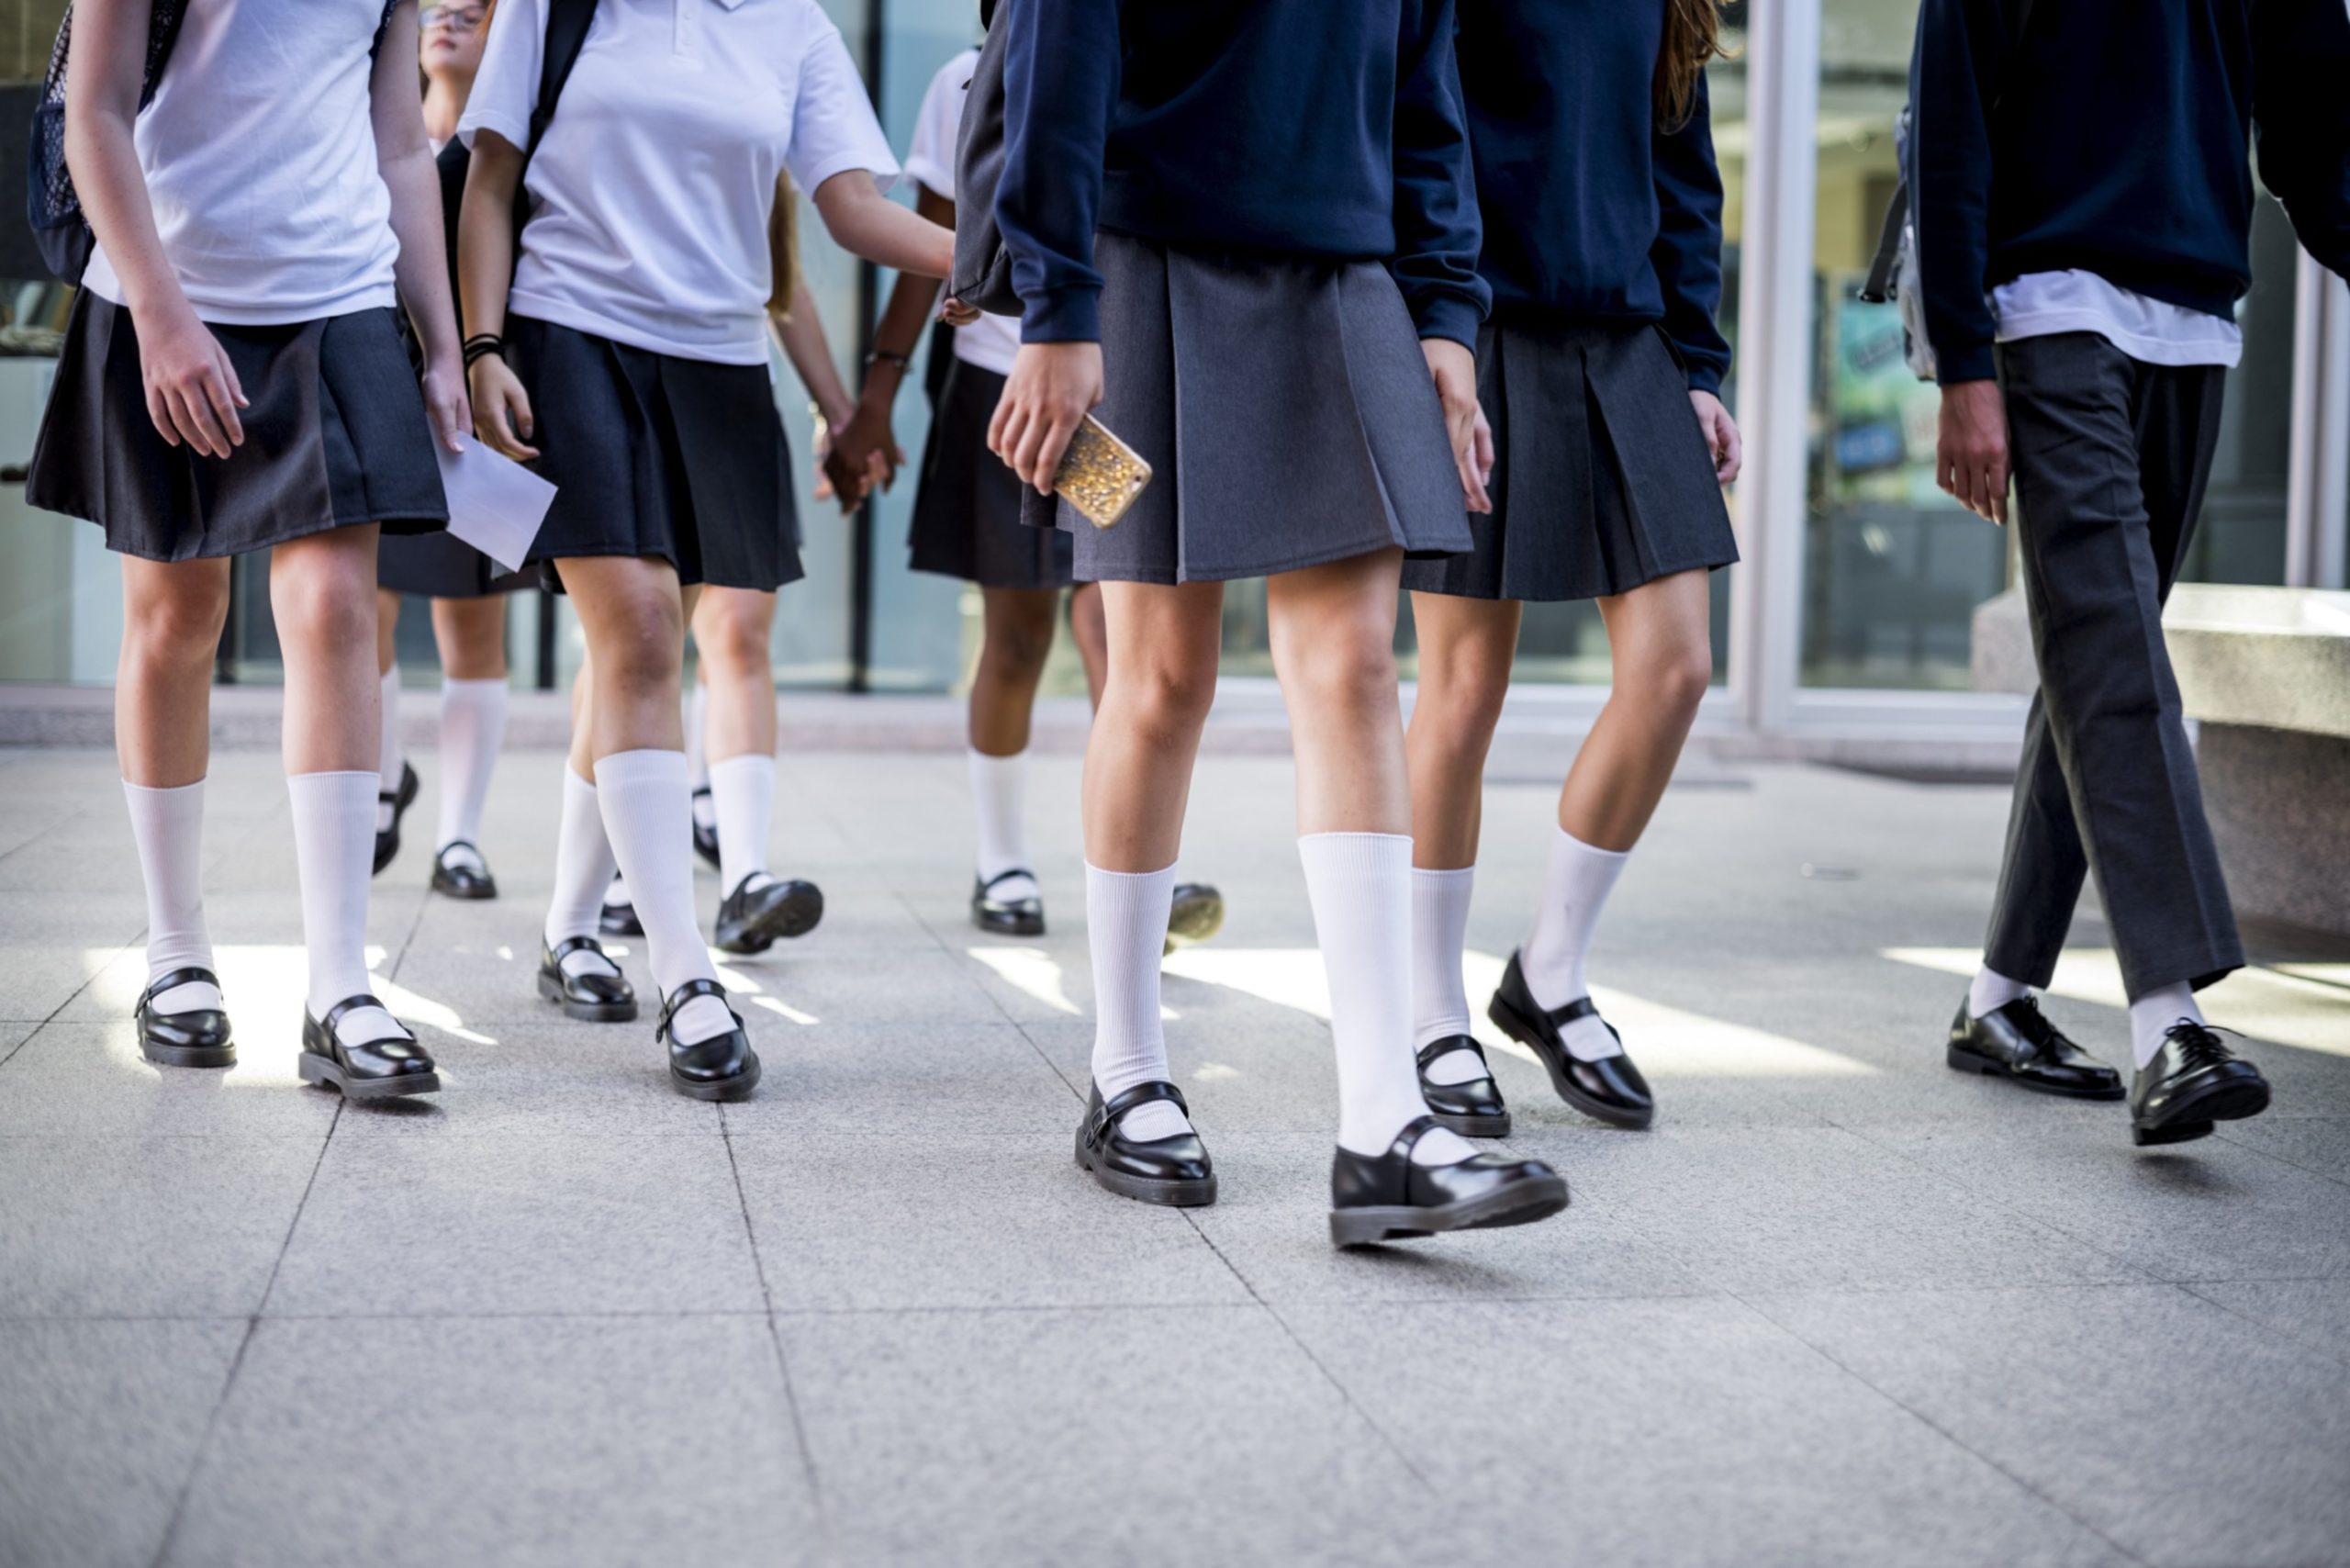 Group of students walking at school.